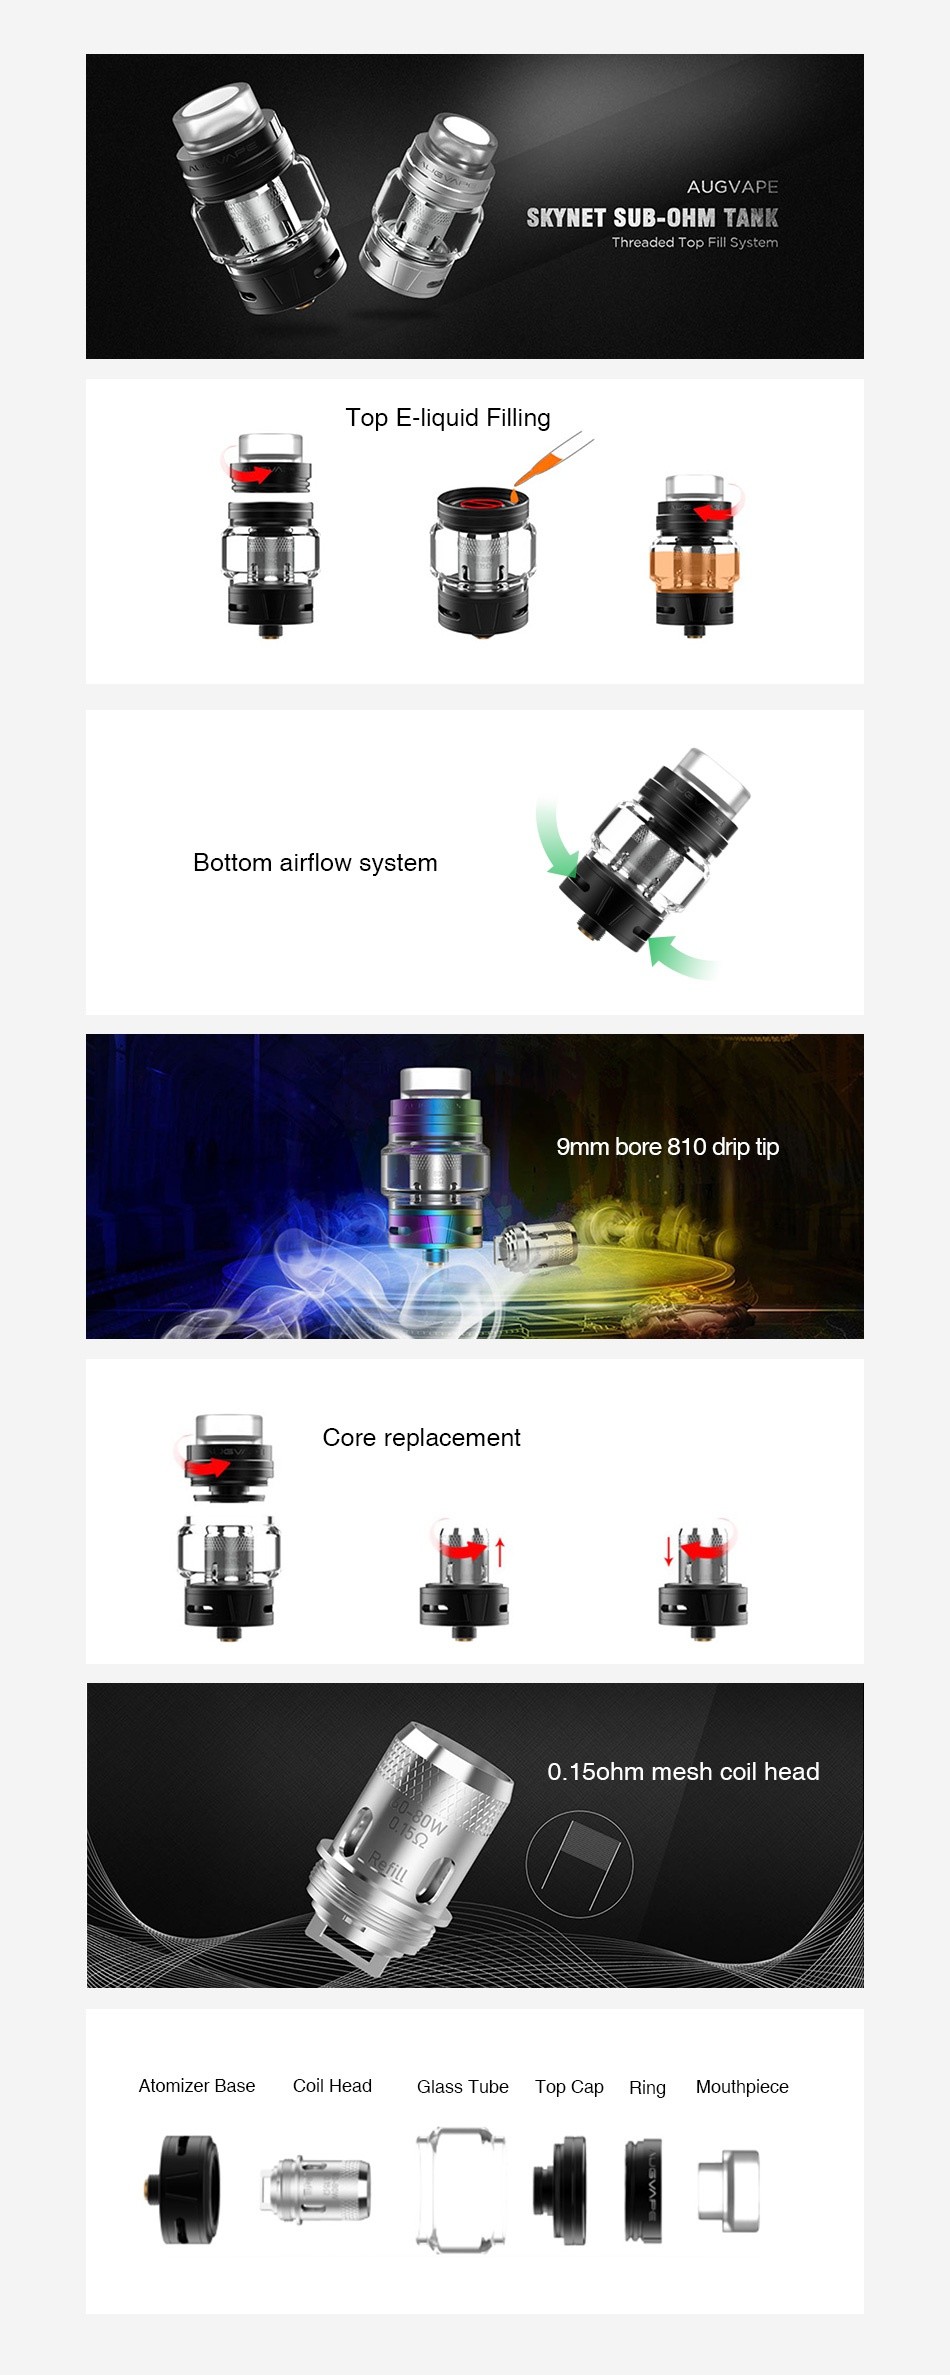 AUGVAPE Skynet Subohm Tank 5.1ml SKYNET SUB OHM TANK Threaded Top Fill System Top E liquid Filling Bottom airflow system 9mm bore 810 drip tip Core replacement    0 15ohm mesh coil head Atomizer Base Coil Head Glass Tube Top Cap Riny Mouthpiece